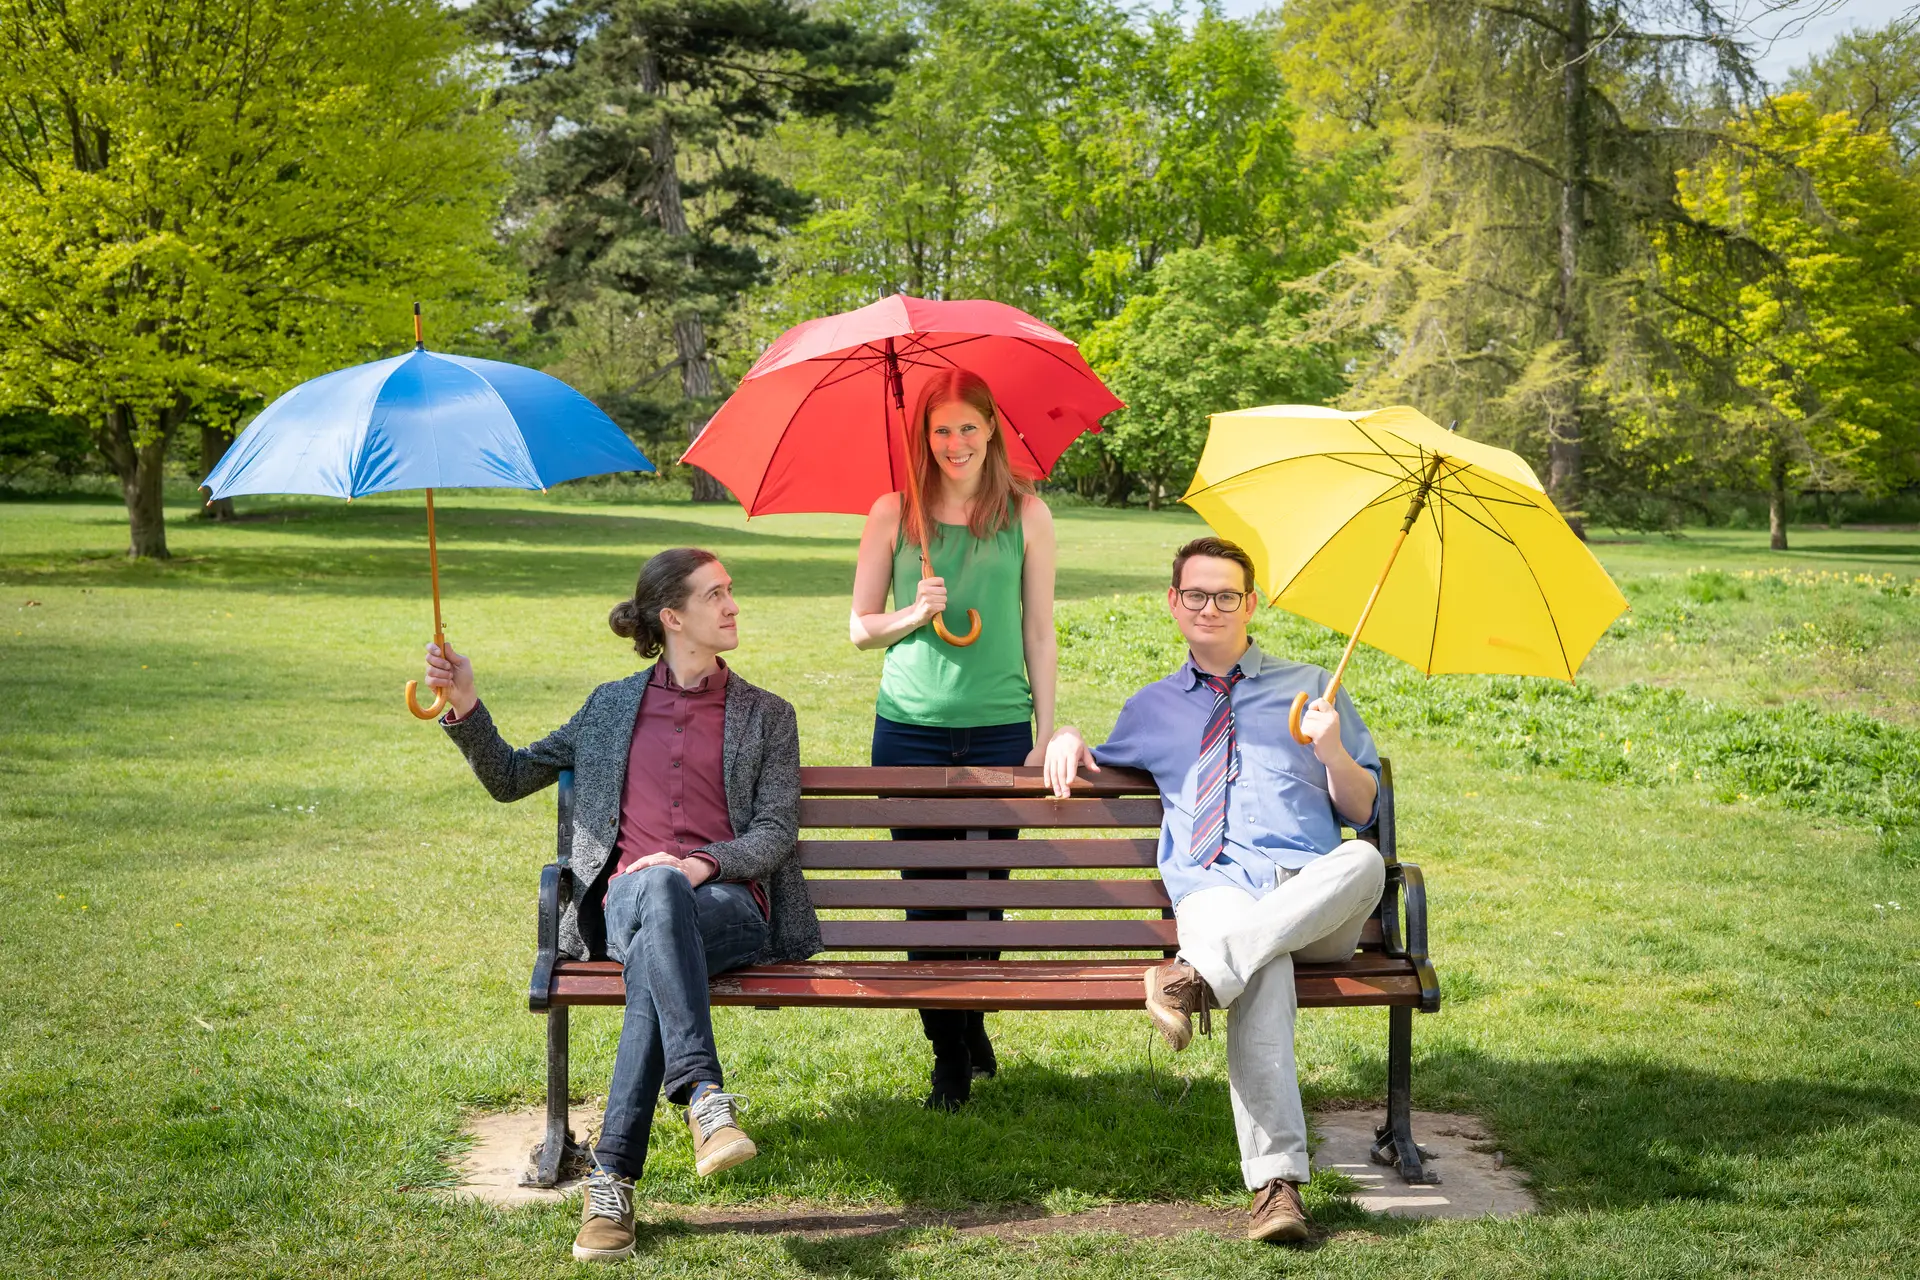 Two men and a woman on a park bench, holding red, blue and yellow umbrellas